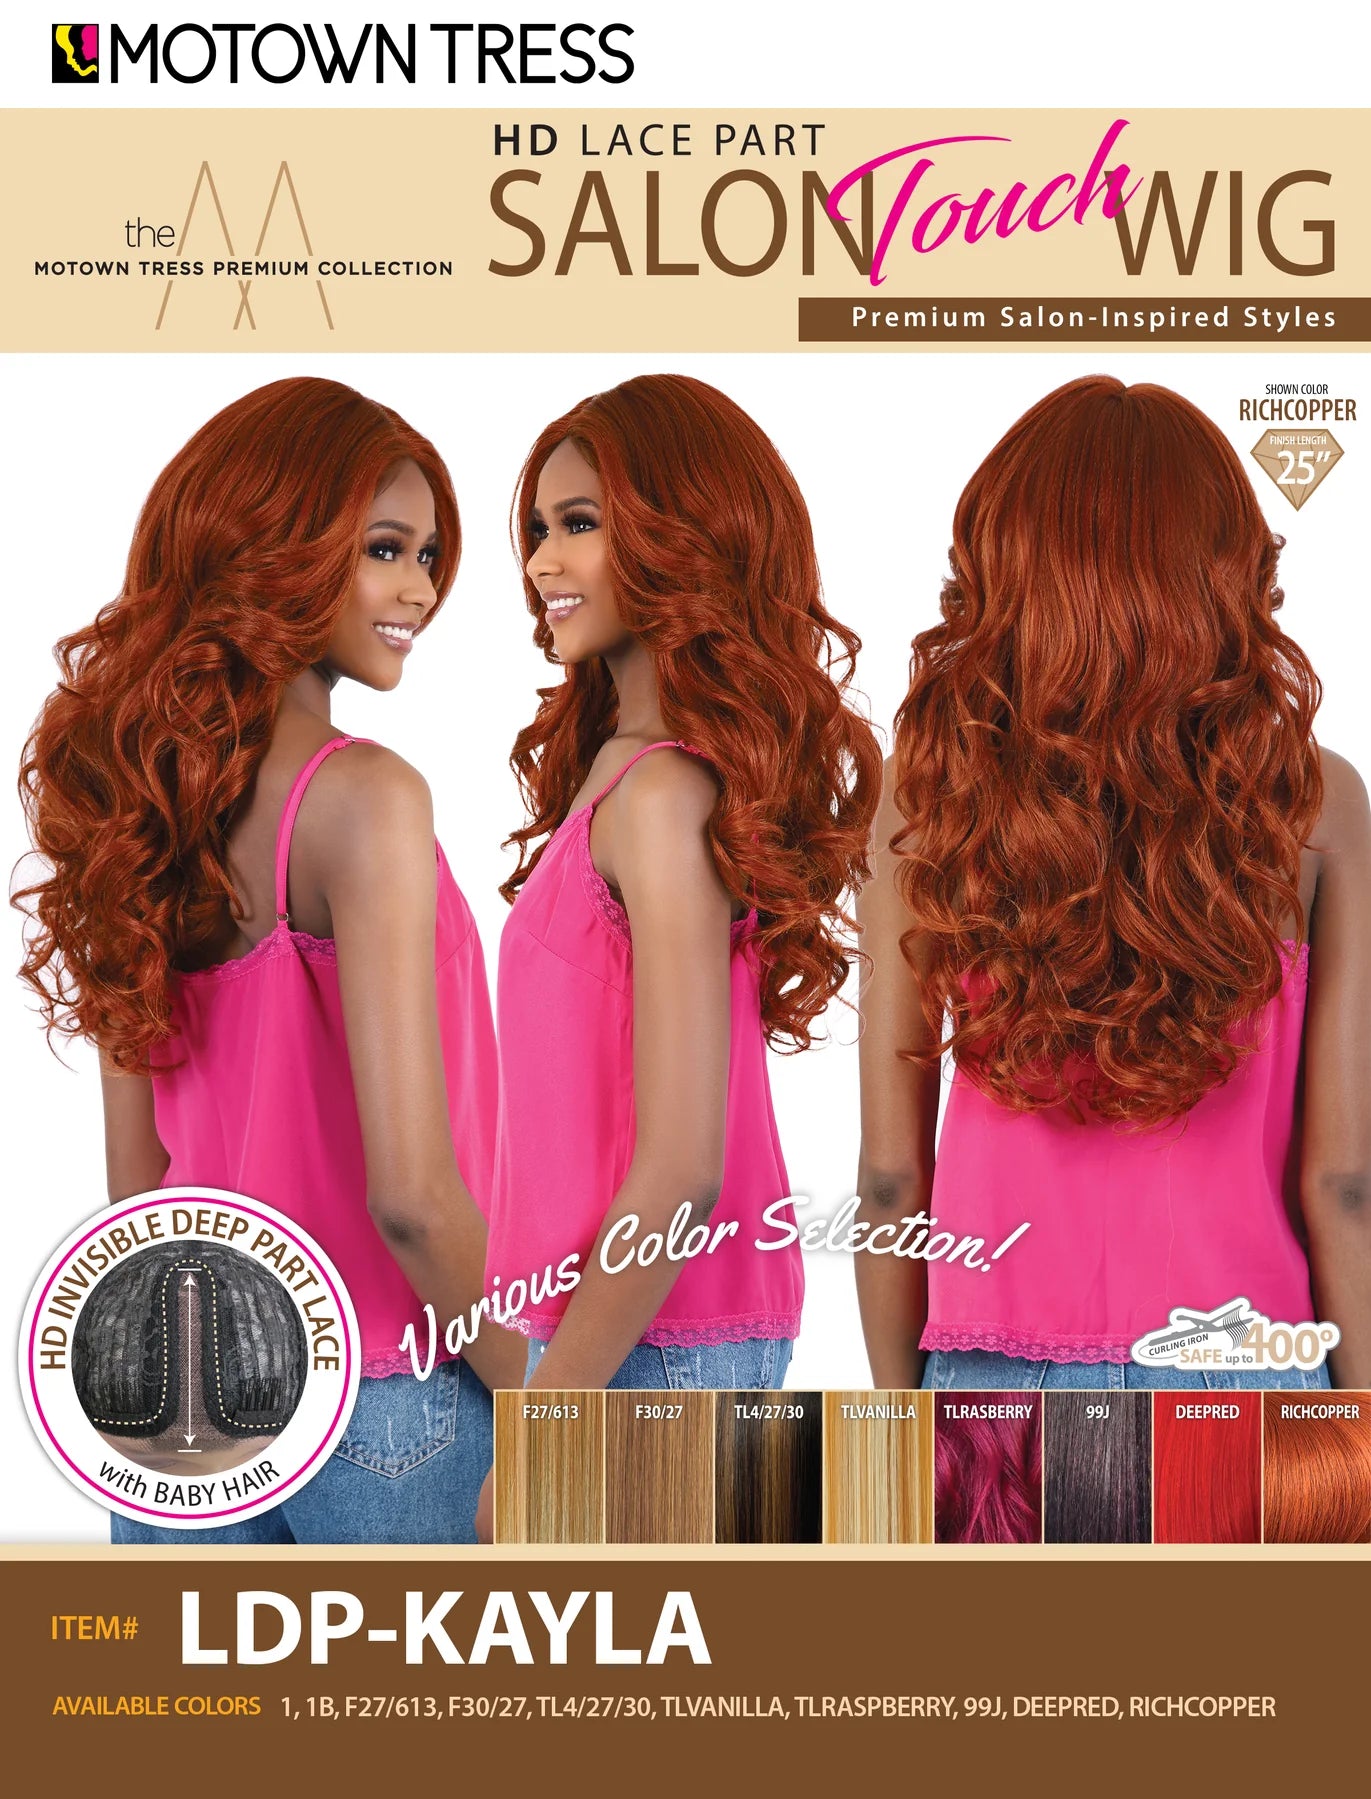 Motown Tress Salon Touch Wig Synthetic Hair HD Lace Part Wig LDP-KAYLA